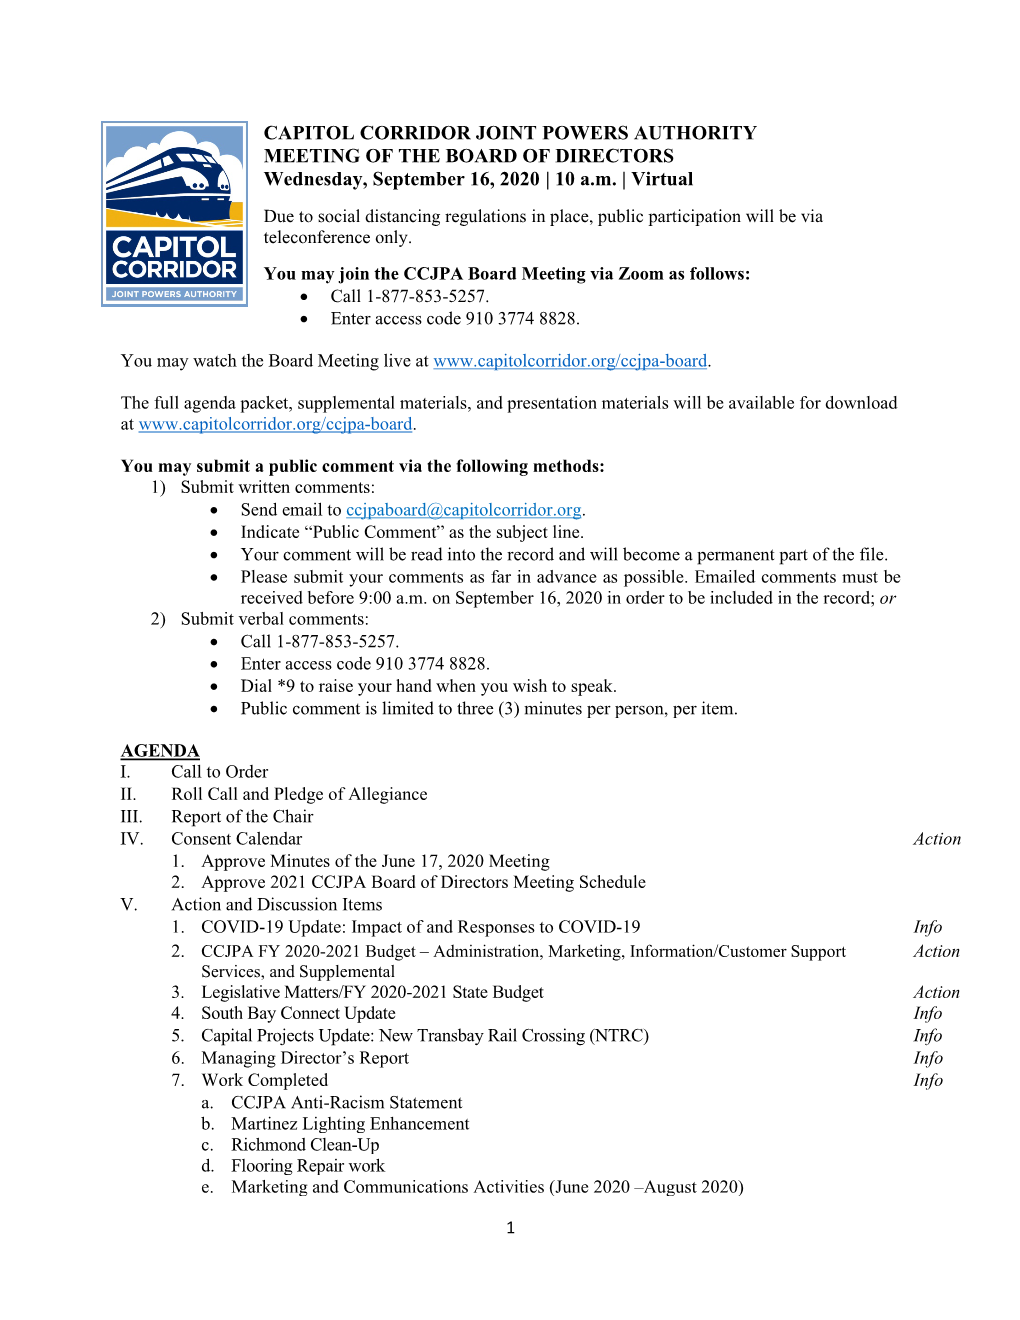 CAPITOL CORRIDOR JOINT POWERS AUTHORITY MEETING of the BOARD of DIRECTORS Wednesday, September 16, 2020 | 10 A.M